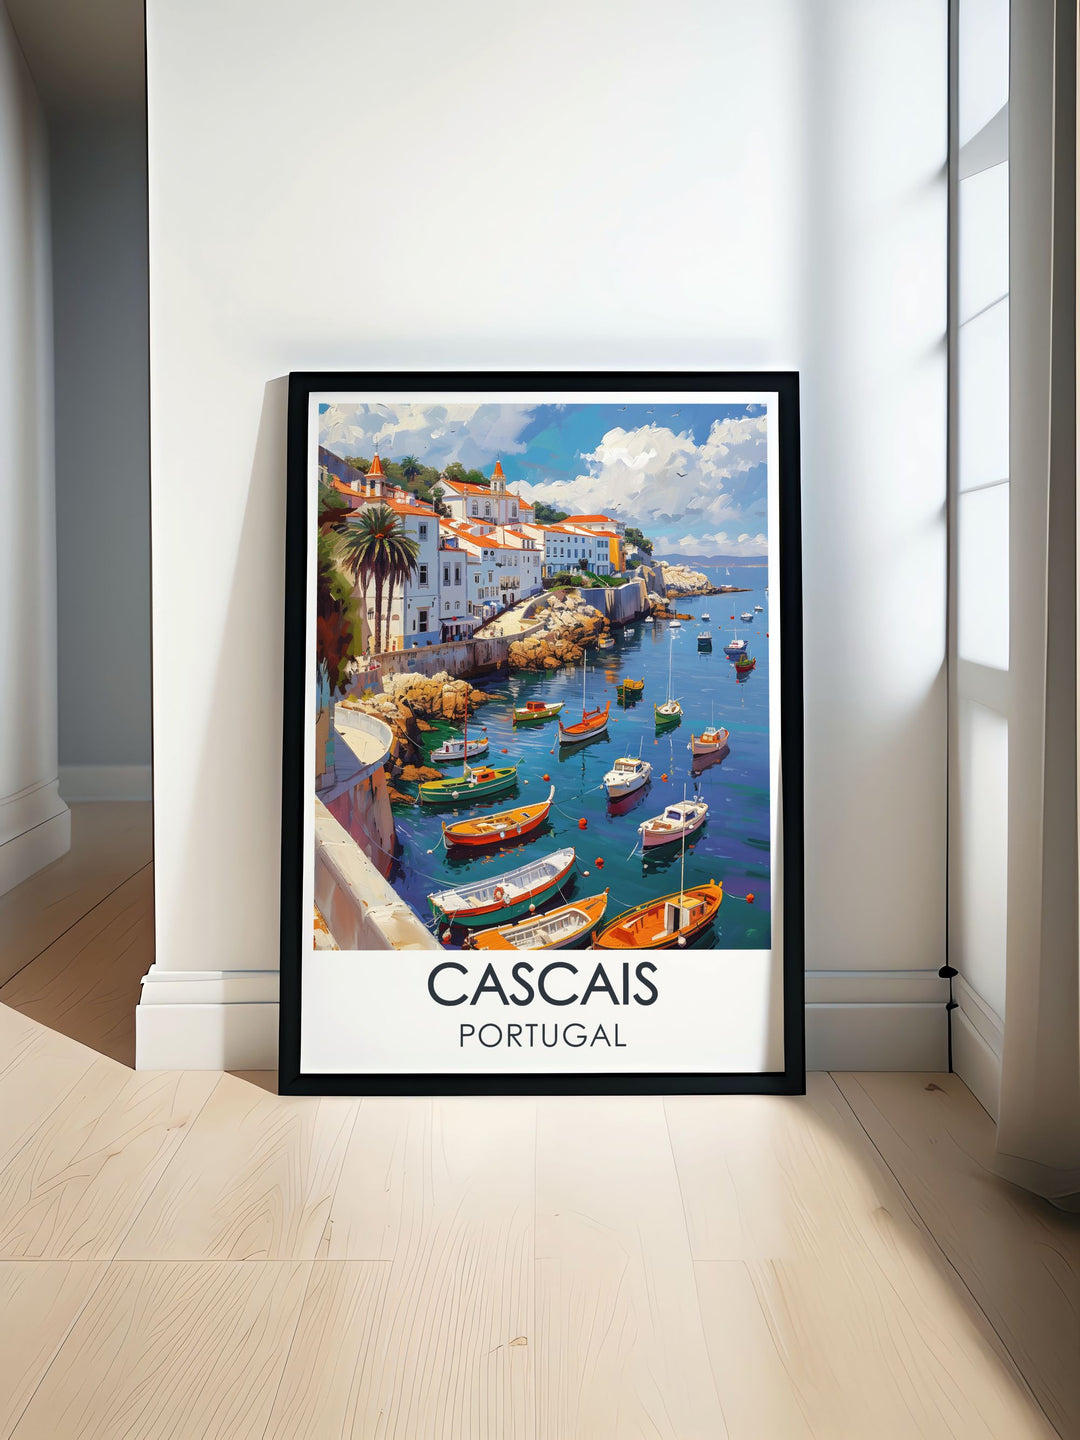 This travel poster beautifully depicts the cultural richness of Cascais, with its lively marina and vibrant local life, making it an ideal piece for urban enthusiasts and collectors. Bring the spirit of Portugal into your home with this exquisite print.